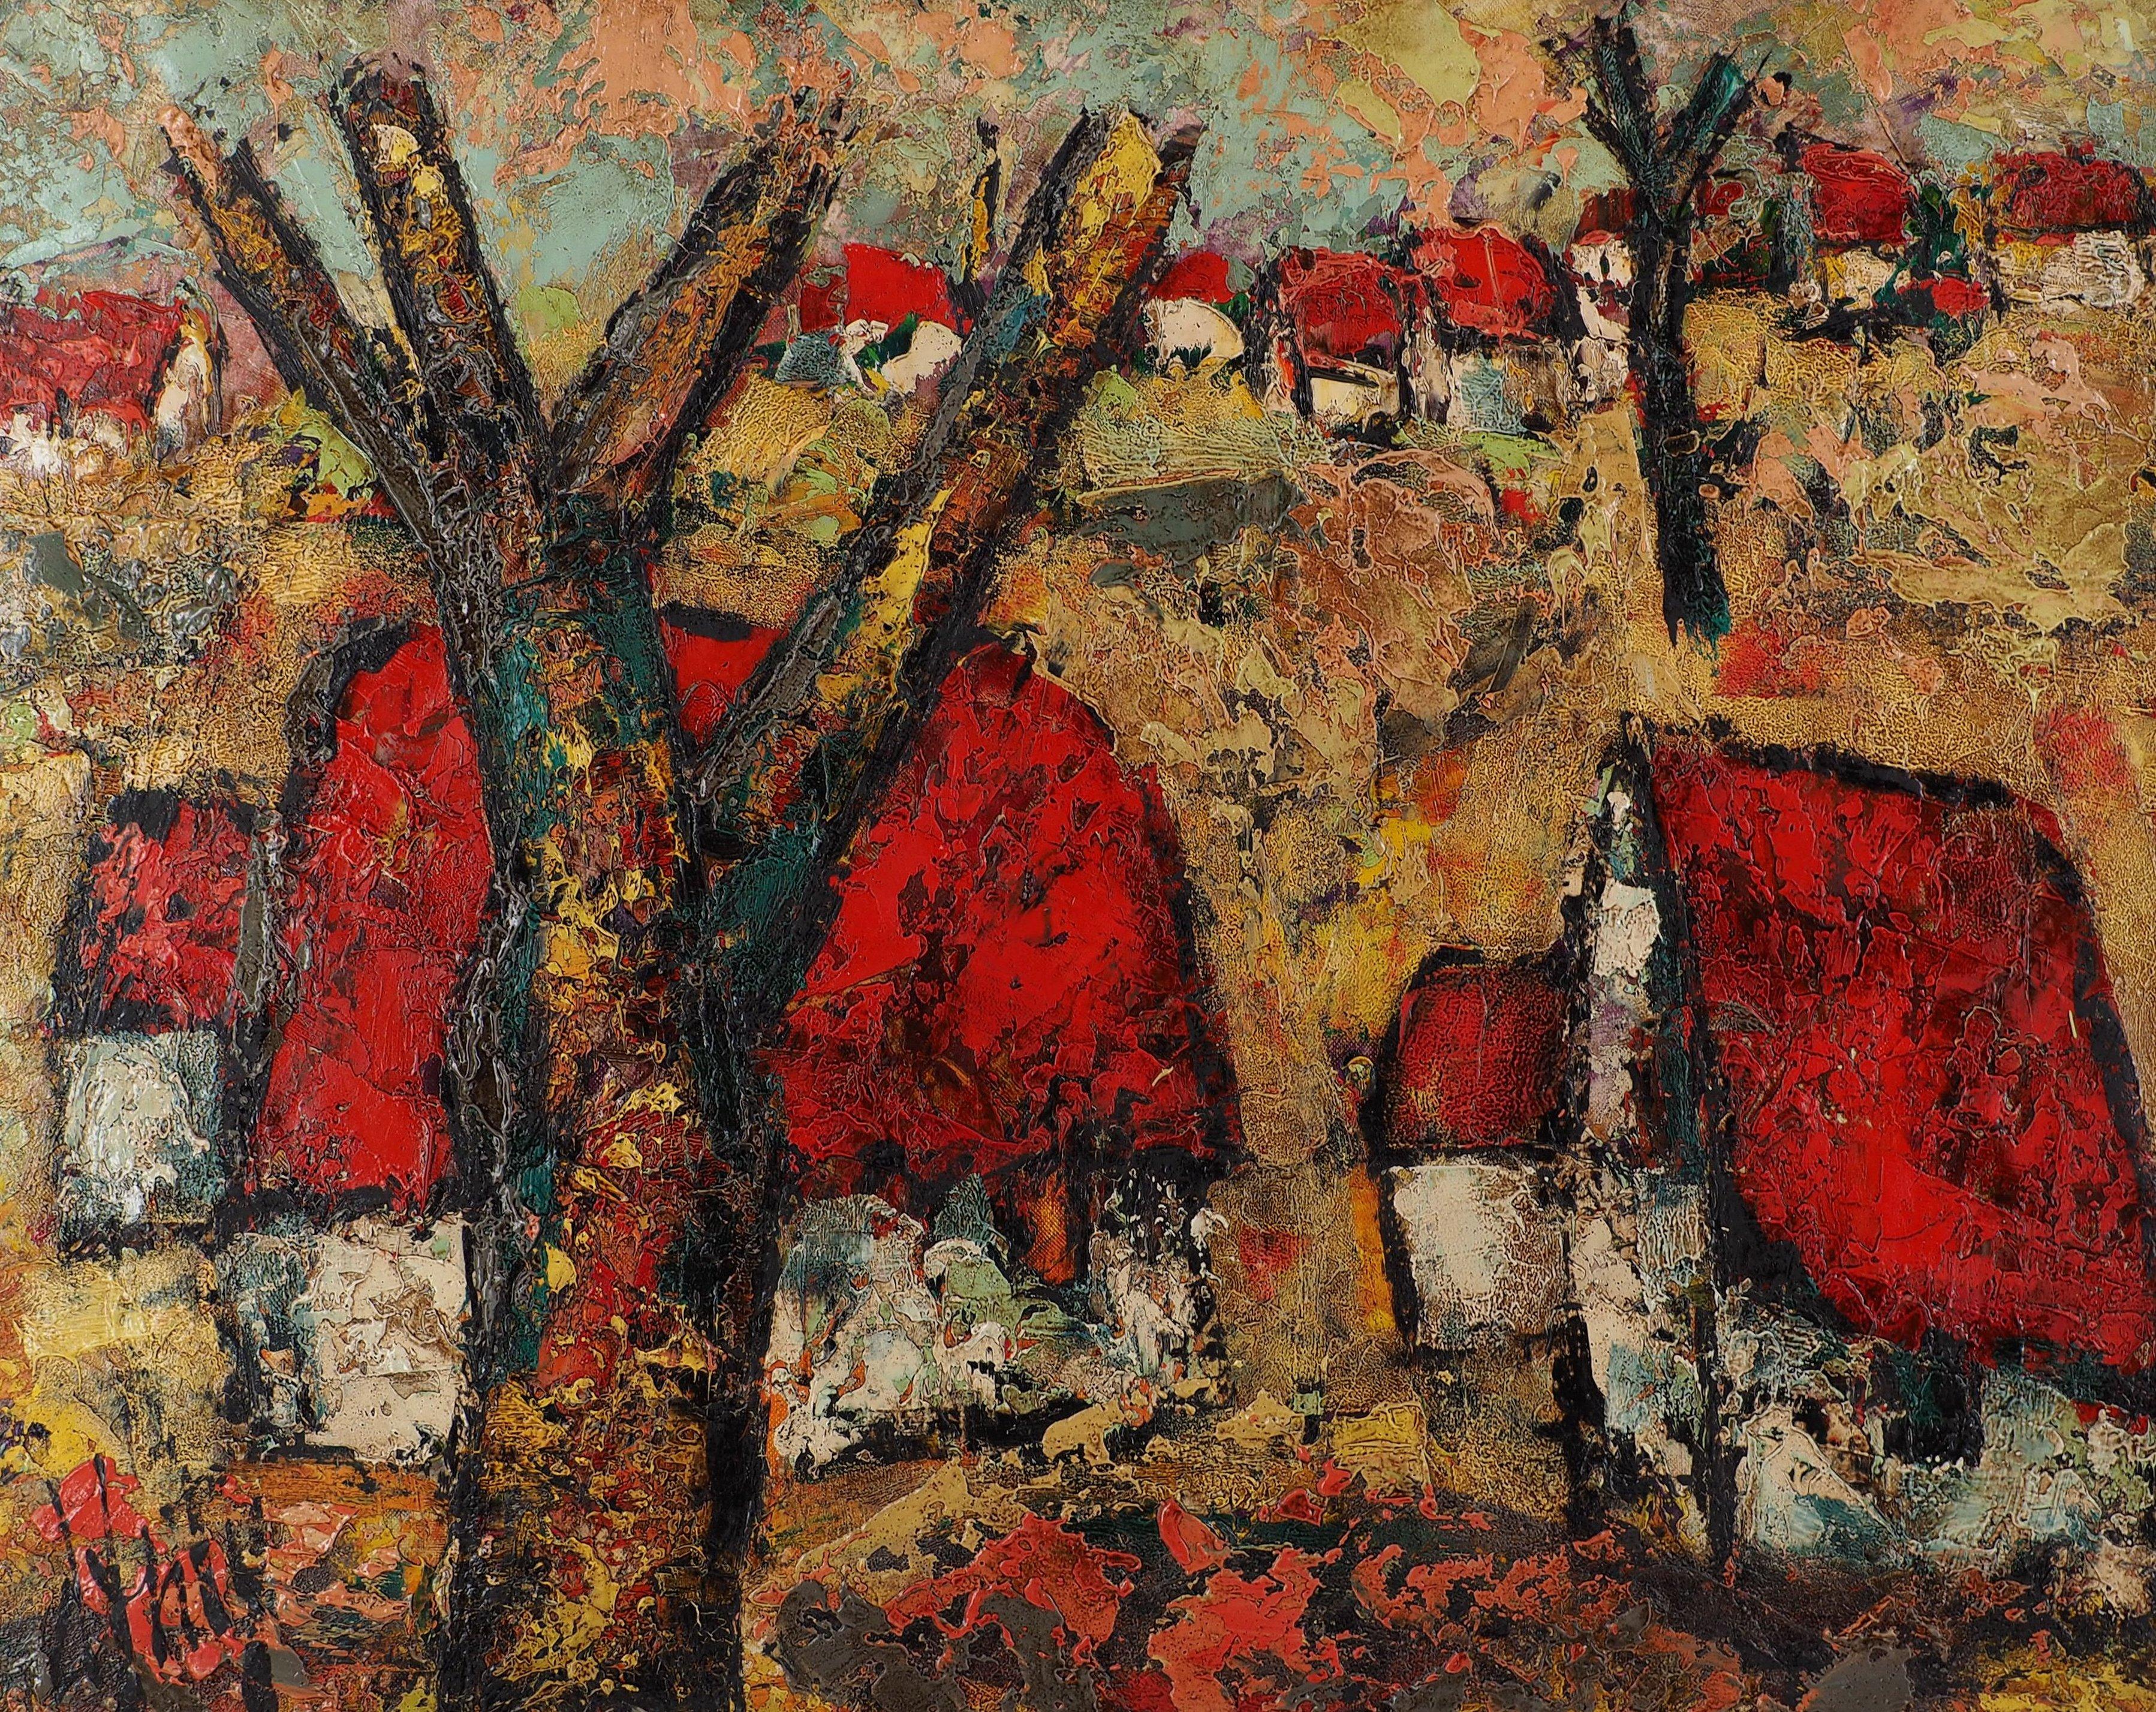 Henri d'Anty Landscape Painting - Brittany : The Red Roofs - Original Oil on canvas, Handsigned